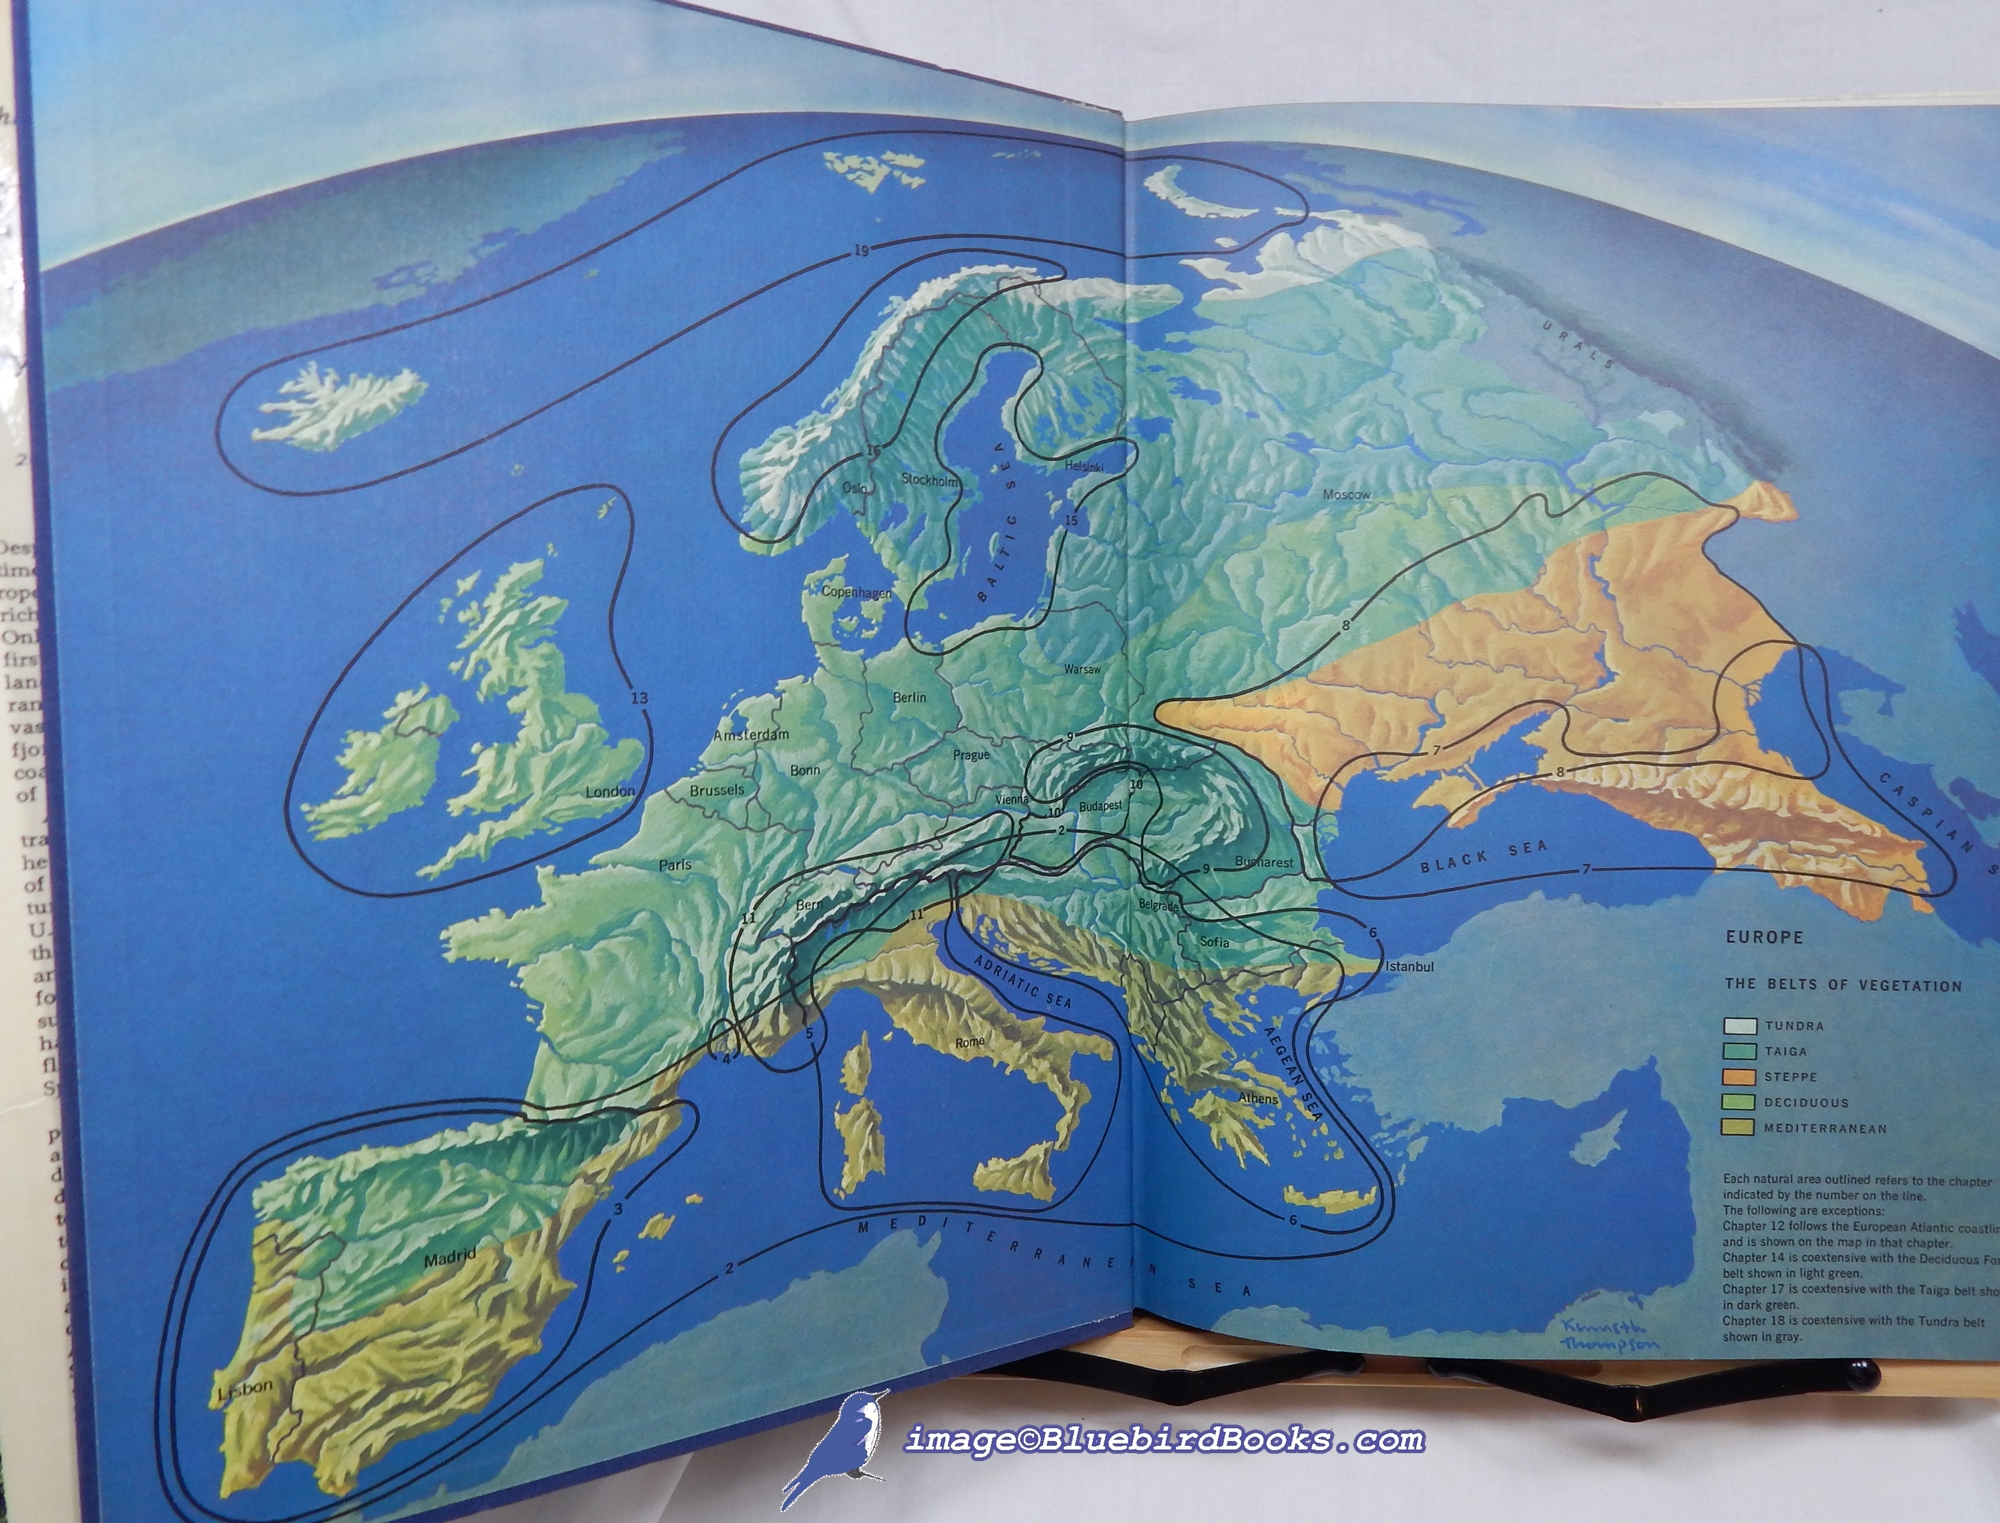 CURRY-LINDAHL, KAI - Europe: A Natural History (the Continents We Live on Series)